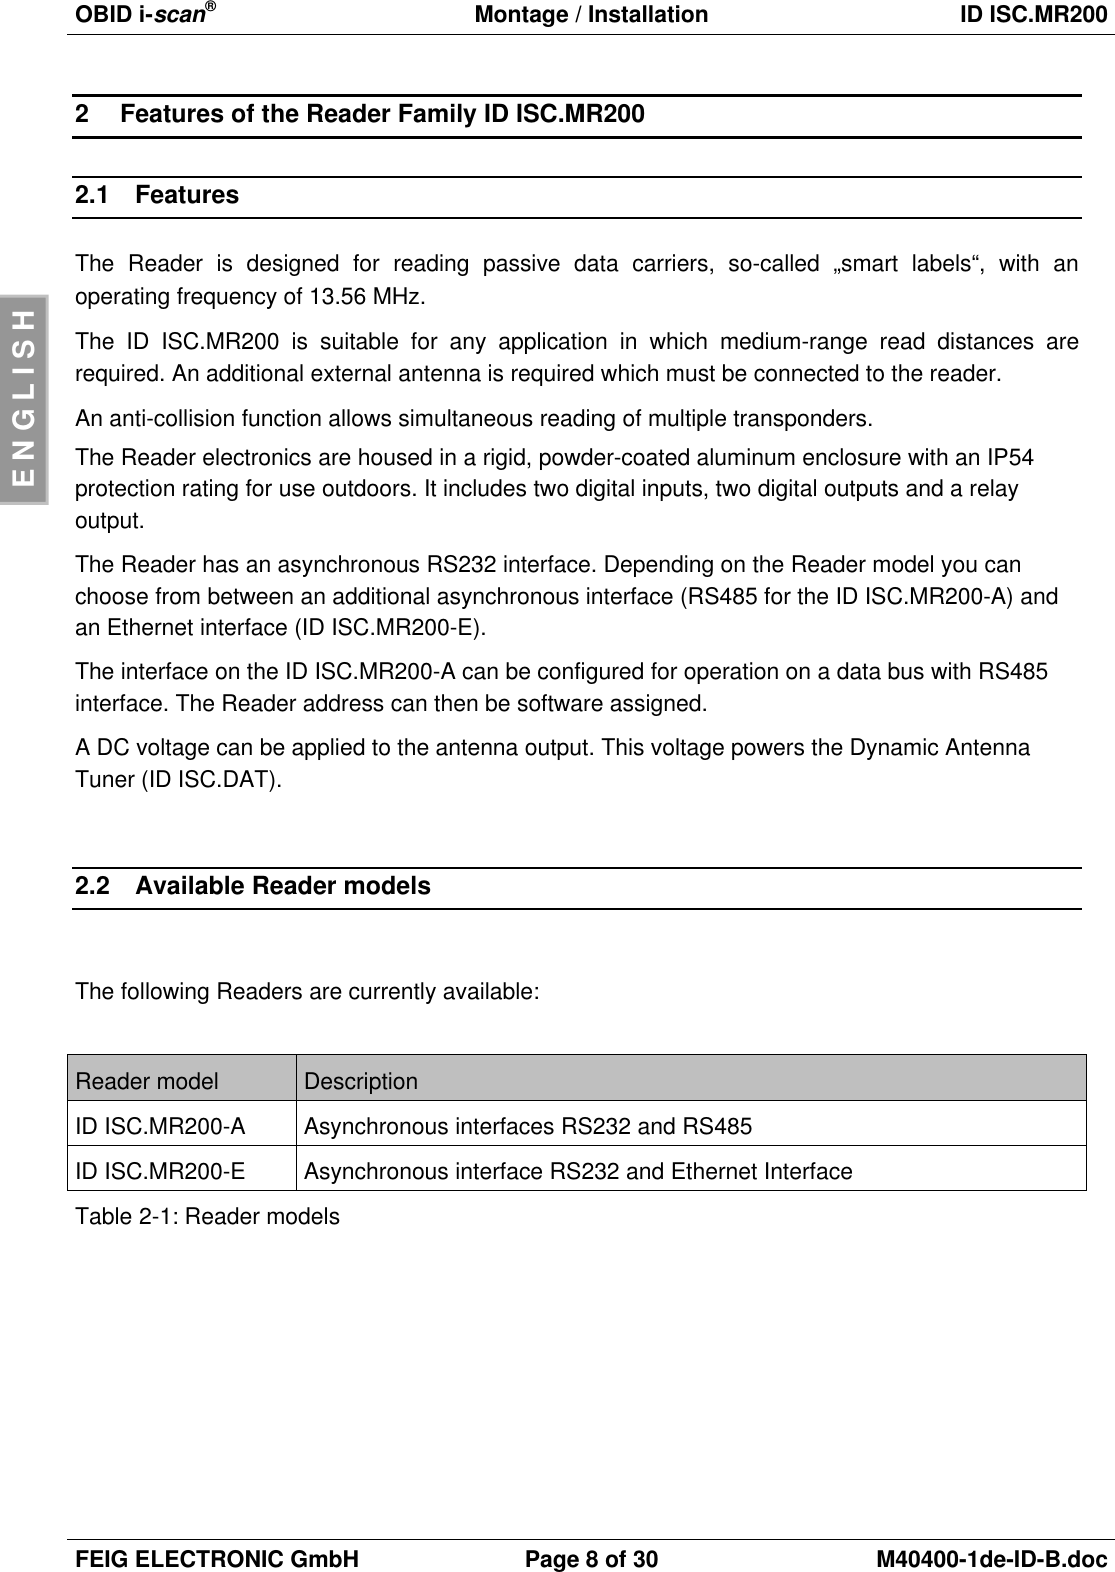 OBID i-scan®Montage / Installation ID ISC.MR200FEIG ELECTRONIC GmbH Page 8of 30 M40400-1de-ID-B.docENGLISH2Features of the Reader Family ID ISC.MR2002.1 FeaturesThe Reader is designed for reading passive data carriers, so-called „smart labels“, with anoperating frequency of 13.56 MHz.The ID ISC.MR200 is suitable for any application in which medium-range read distances arerequired. An additional external antenna is required which must be connected to the reader.An anti-collision function allows simultaneous reading of multiple transponders.The Reader electronics are housed in a rigid, powder-coated aluminum enclosure with an IP54protection rating for use outdoors. It includes two digital inputs, two digital outputs and a relayoutput.The Reader has an asynchronous RS232 interface. Depending on the Reader model you canchoose from between an additional asynchronous interface (RS485 for the ID ISC.MR200-A) andan Ethernet interface (ID ISC.MR200-E).The interface on the ID ISC.MR200-A can be configured for operation on a data bus with RS485interface. The Reader address can then be software assigned.A DC voltage can be applied to the antenna output. This voltage powers the Dynamic AntennaTuner (ID ISC.DAT).2.2 Available Reader modelsThe following Readers are currently available:Reader model DescriptionID ISC.MR200-A Asynchronous interfaces RS232 and RS485ID ISC.MR200-E Asynchronous interface RS232 and Ethernet InterfaceTable 2-1: Reader models